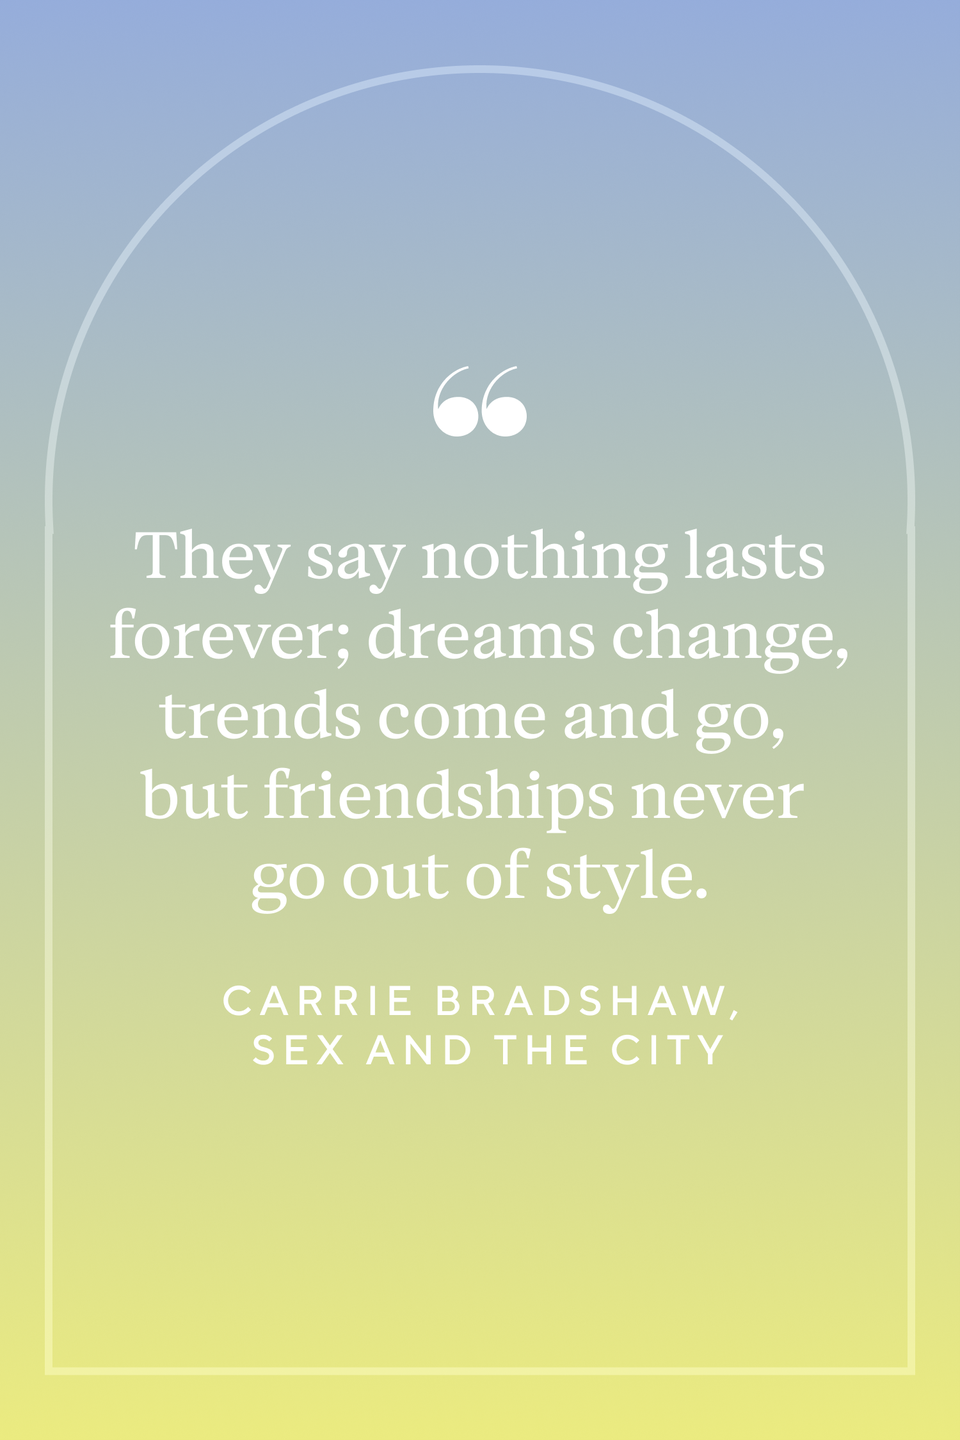 <p>Fictional character Carrie Bradshaw from <em>Sex and The City </em>said, "They say nothing lasts forever; dreams change, trends come and go, but friendships never go out of style."</p>